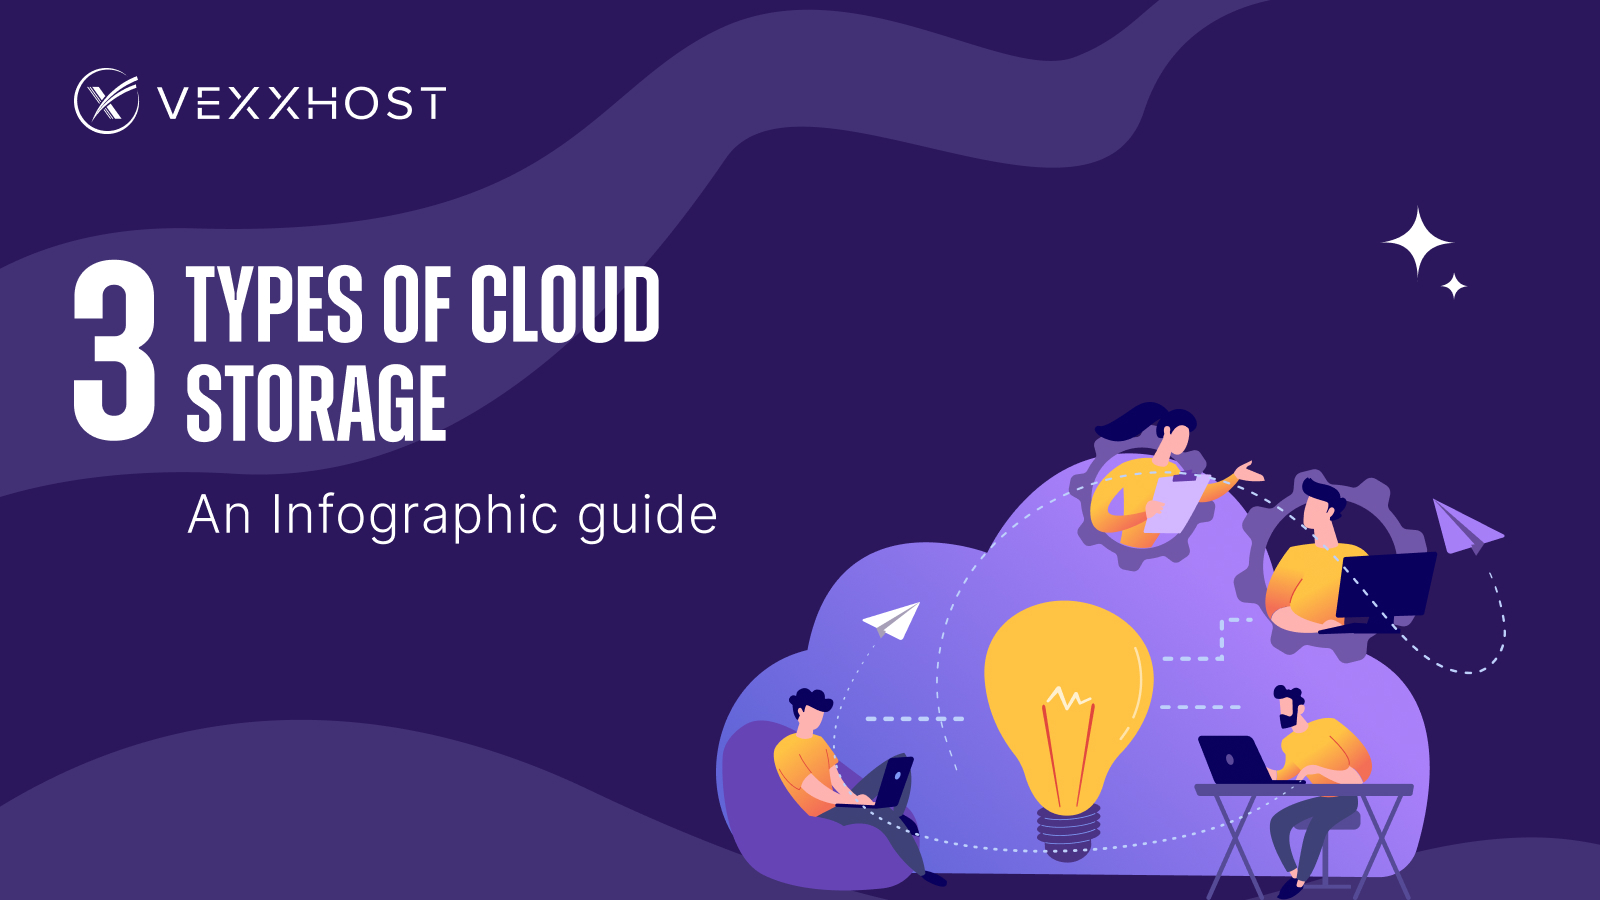 3 Types of Cloud Storage - An Infographic Guide